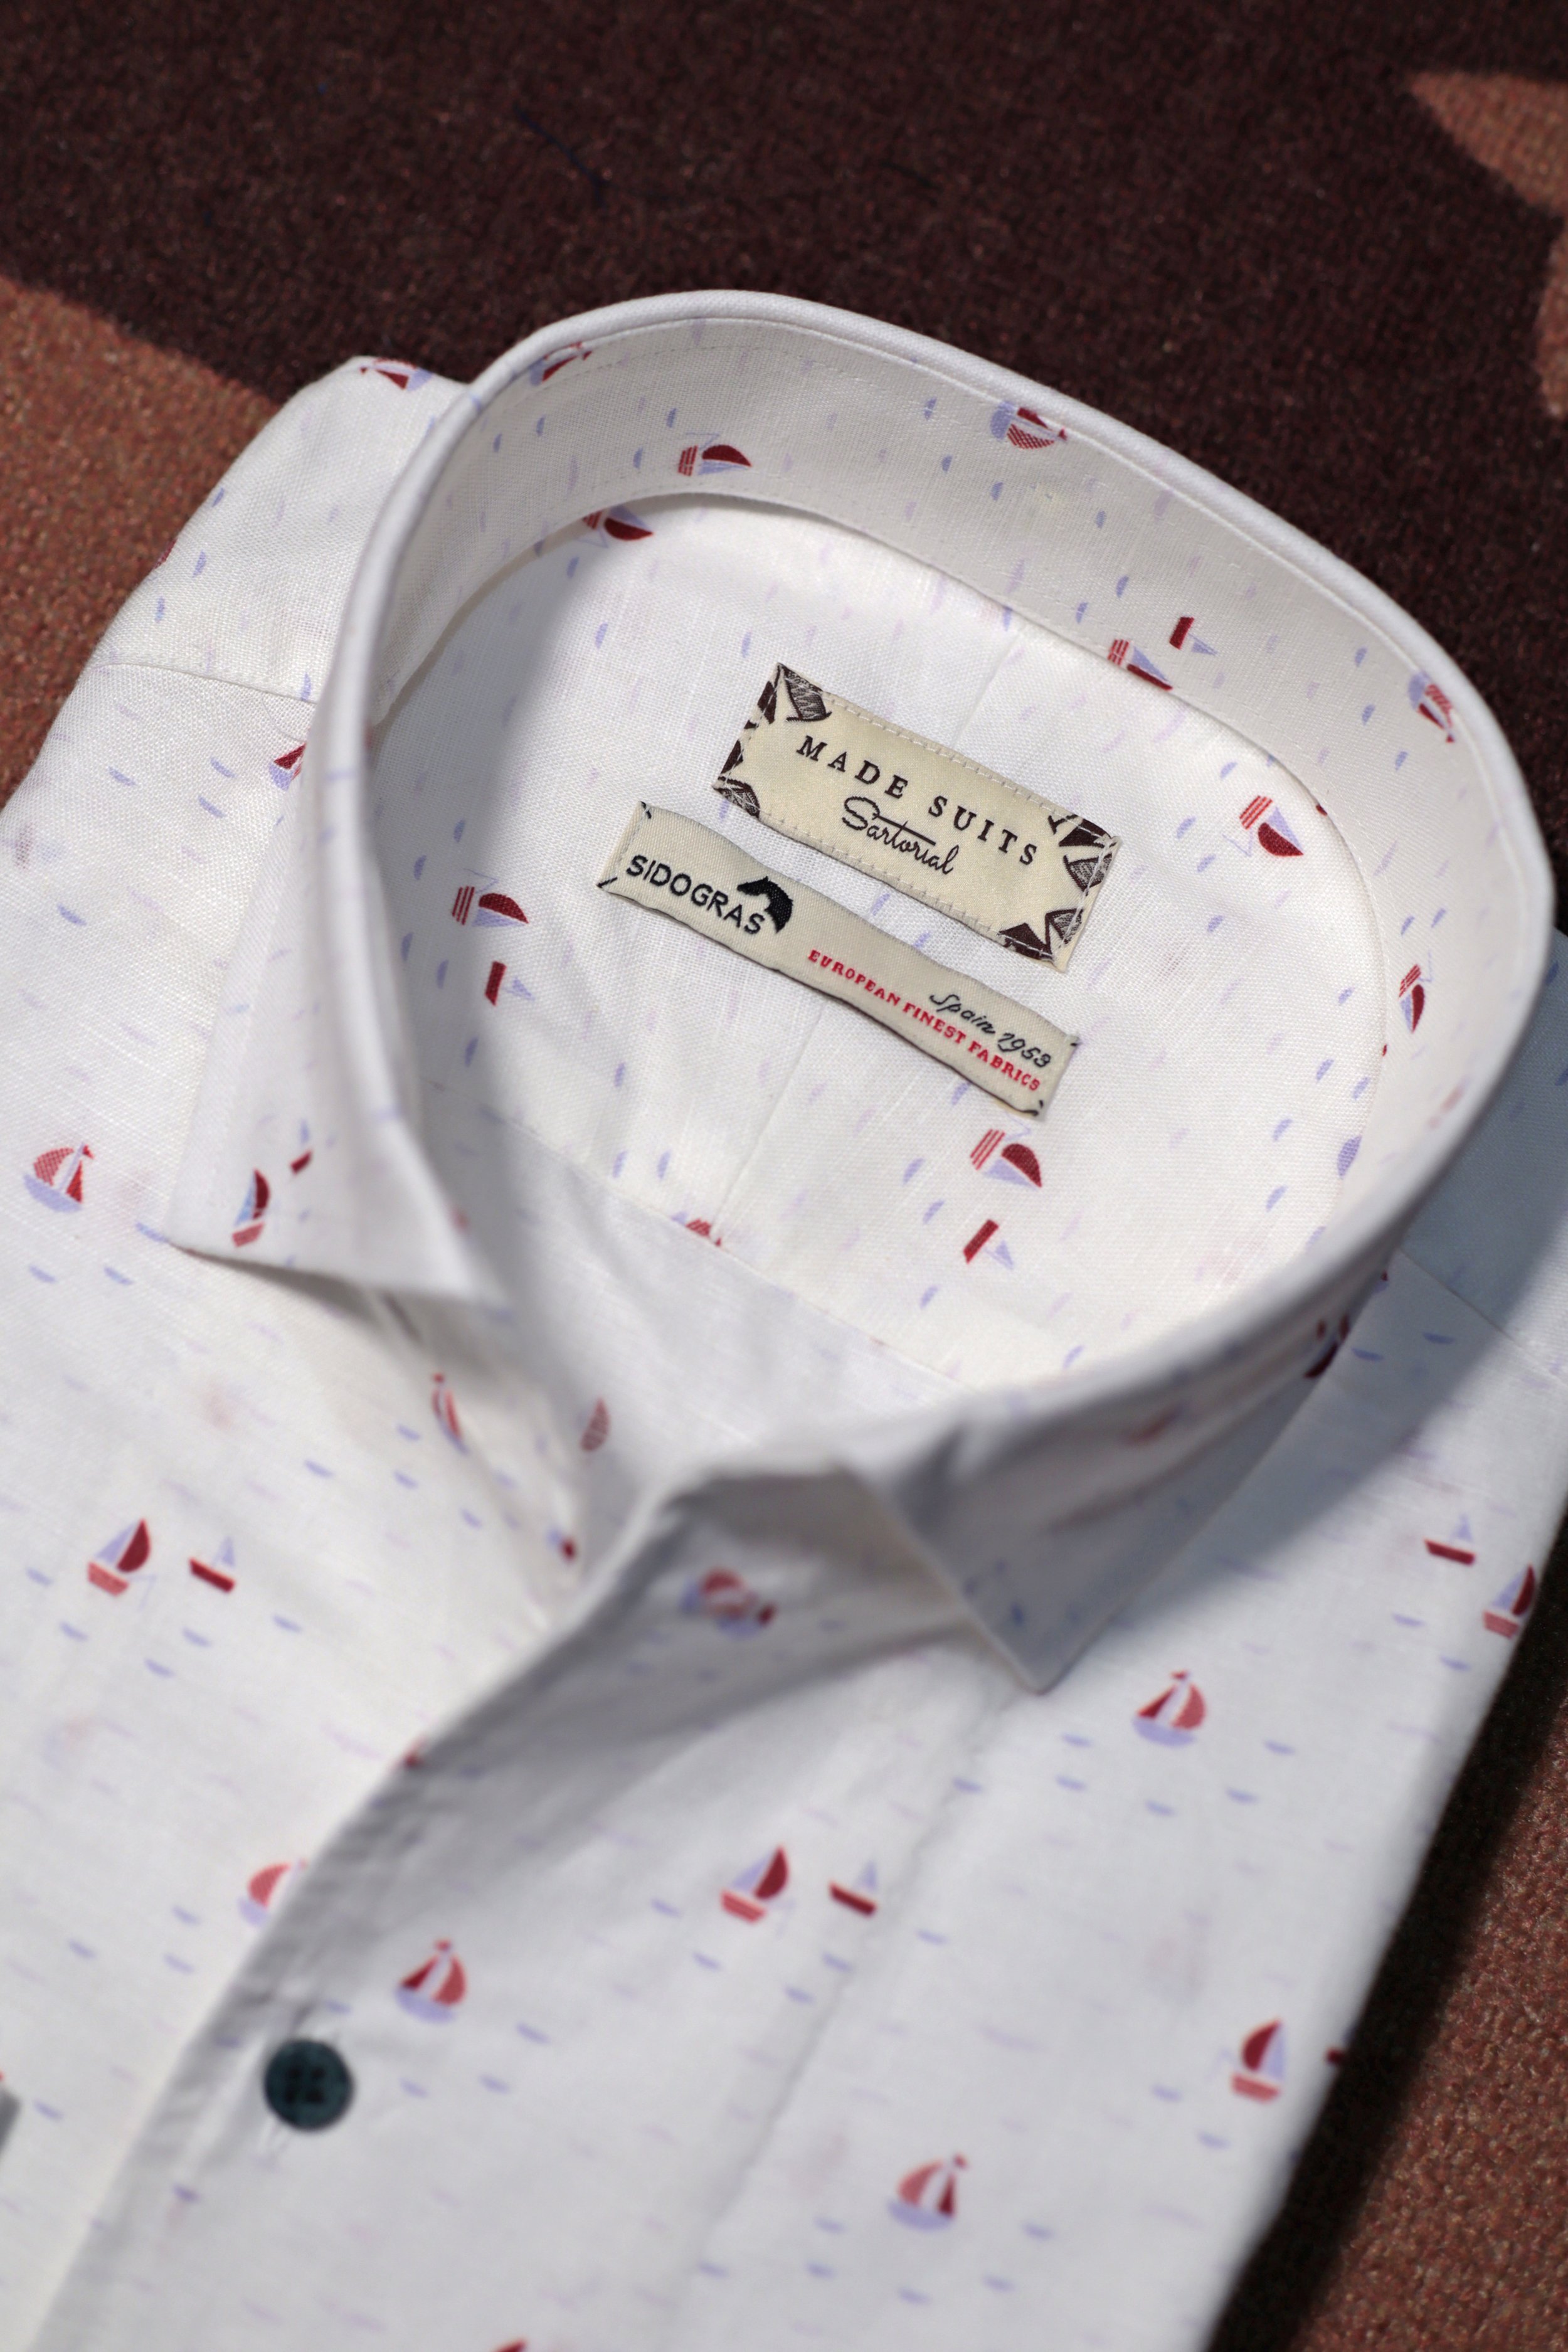 Little Boat Sidogras | One Piece Collar | Made Suits SIngapore BTM Shirts Bespoke Shirts Linen Shirts Made in Japan .JPG